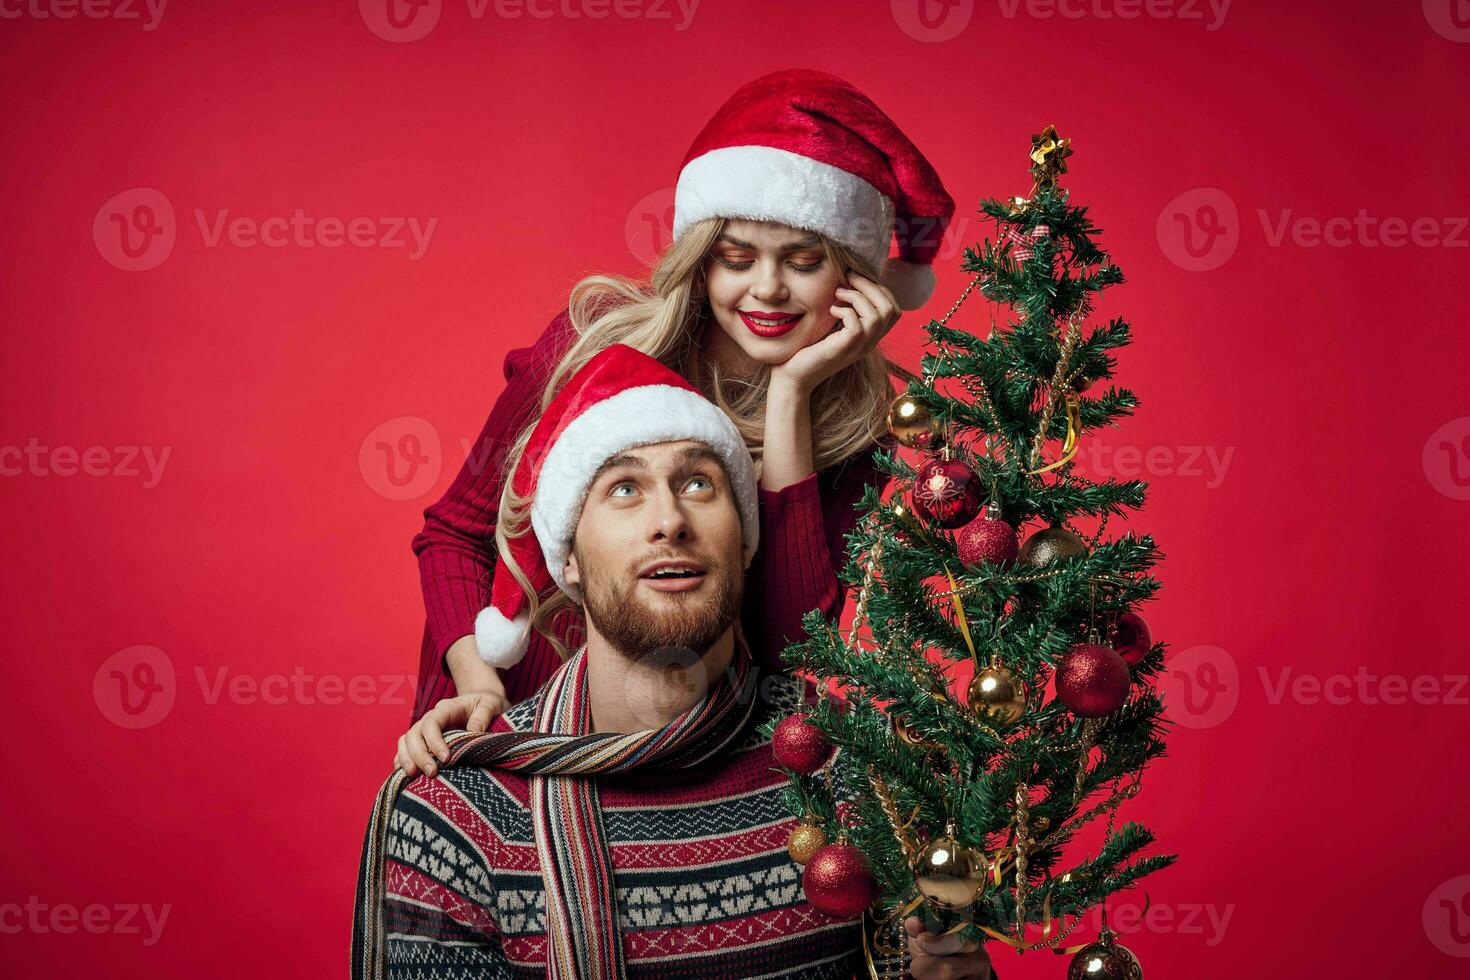 man and woman christmas tree decoration fun holiday red background photo